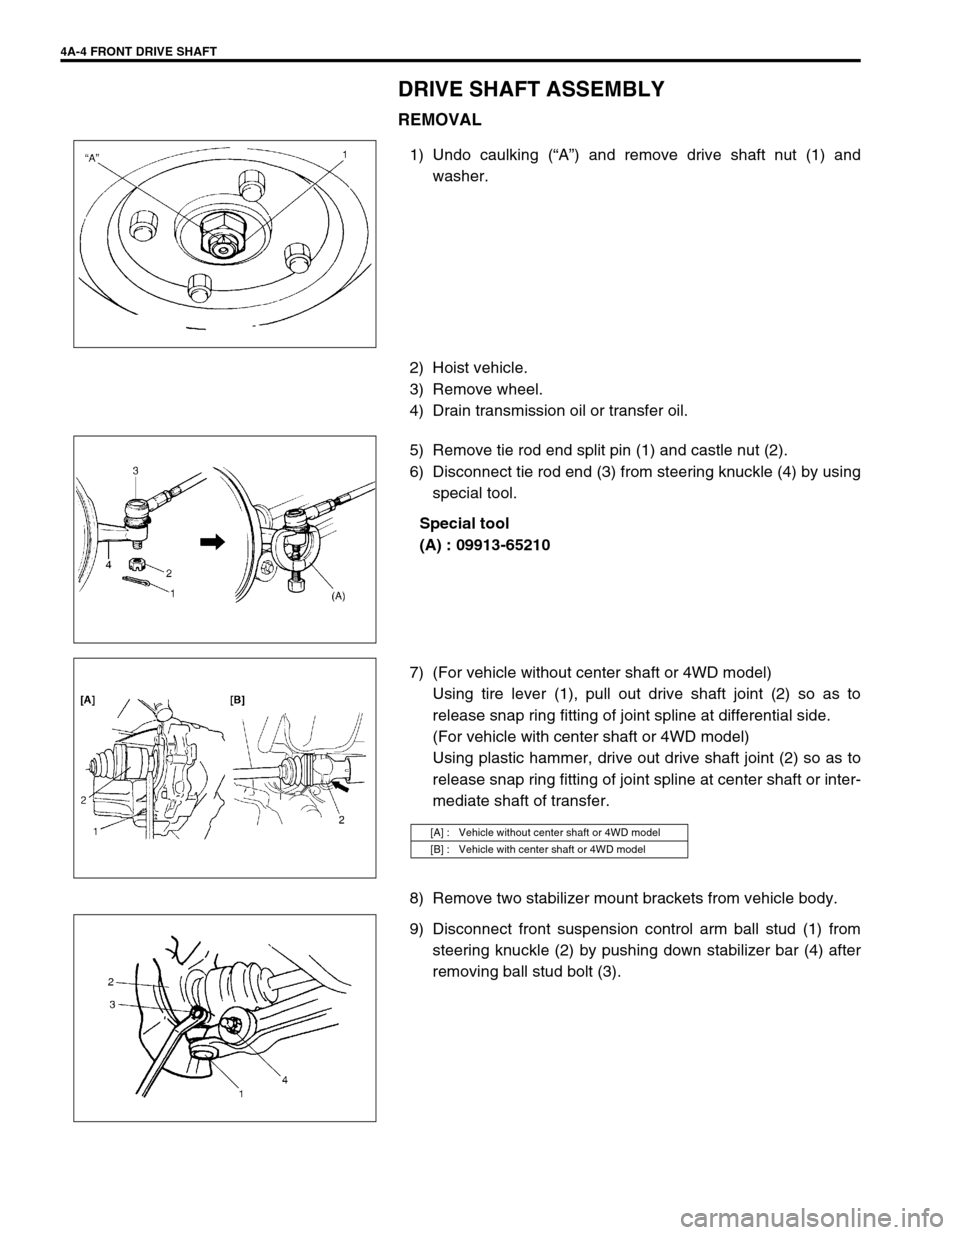 SUZUKI SWIFT 2000 1.G RG413 Service Workshop Manual 4A-4 FRONT DRIVE SHAFT
DRIVE SHAFT ASSEMBLY
REMOVAL
1) Undo caulking (“A”) and remove drive shaft nut (1) and
washer.
2) Hoist vehicle.
3) Remove wheel.
4) Drain transmission oil or transfer oil.
